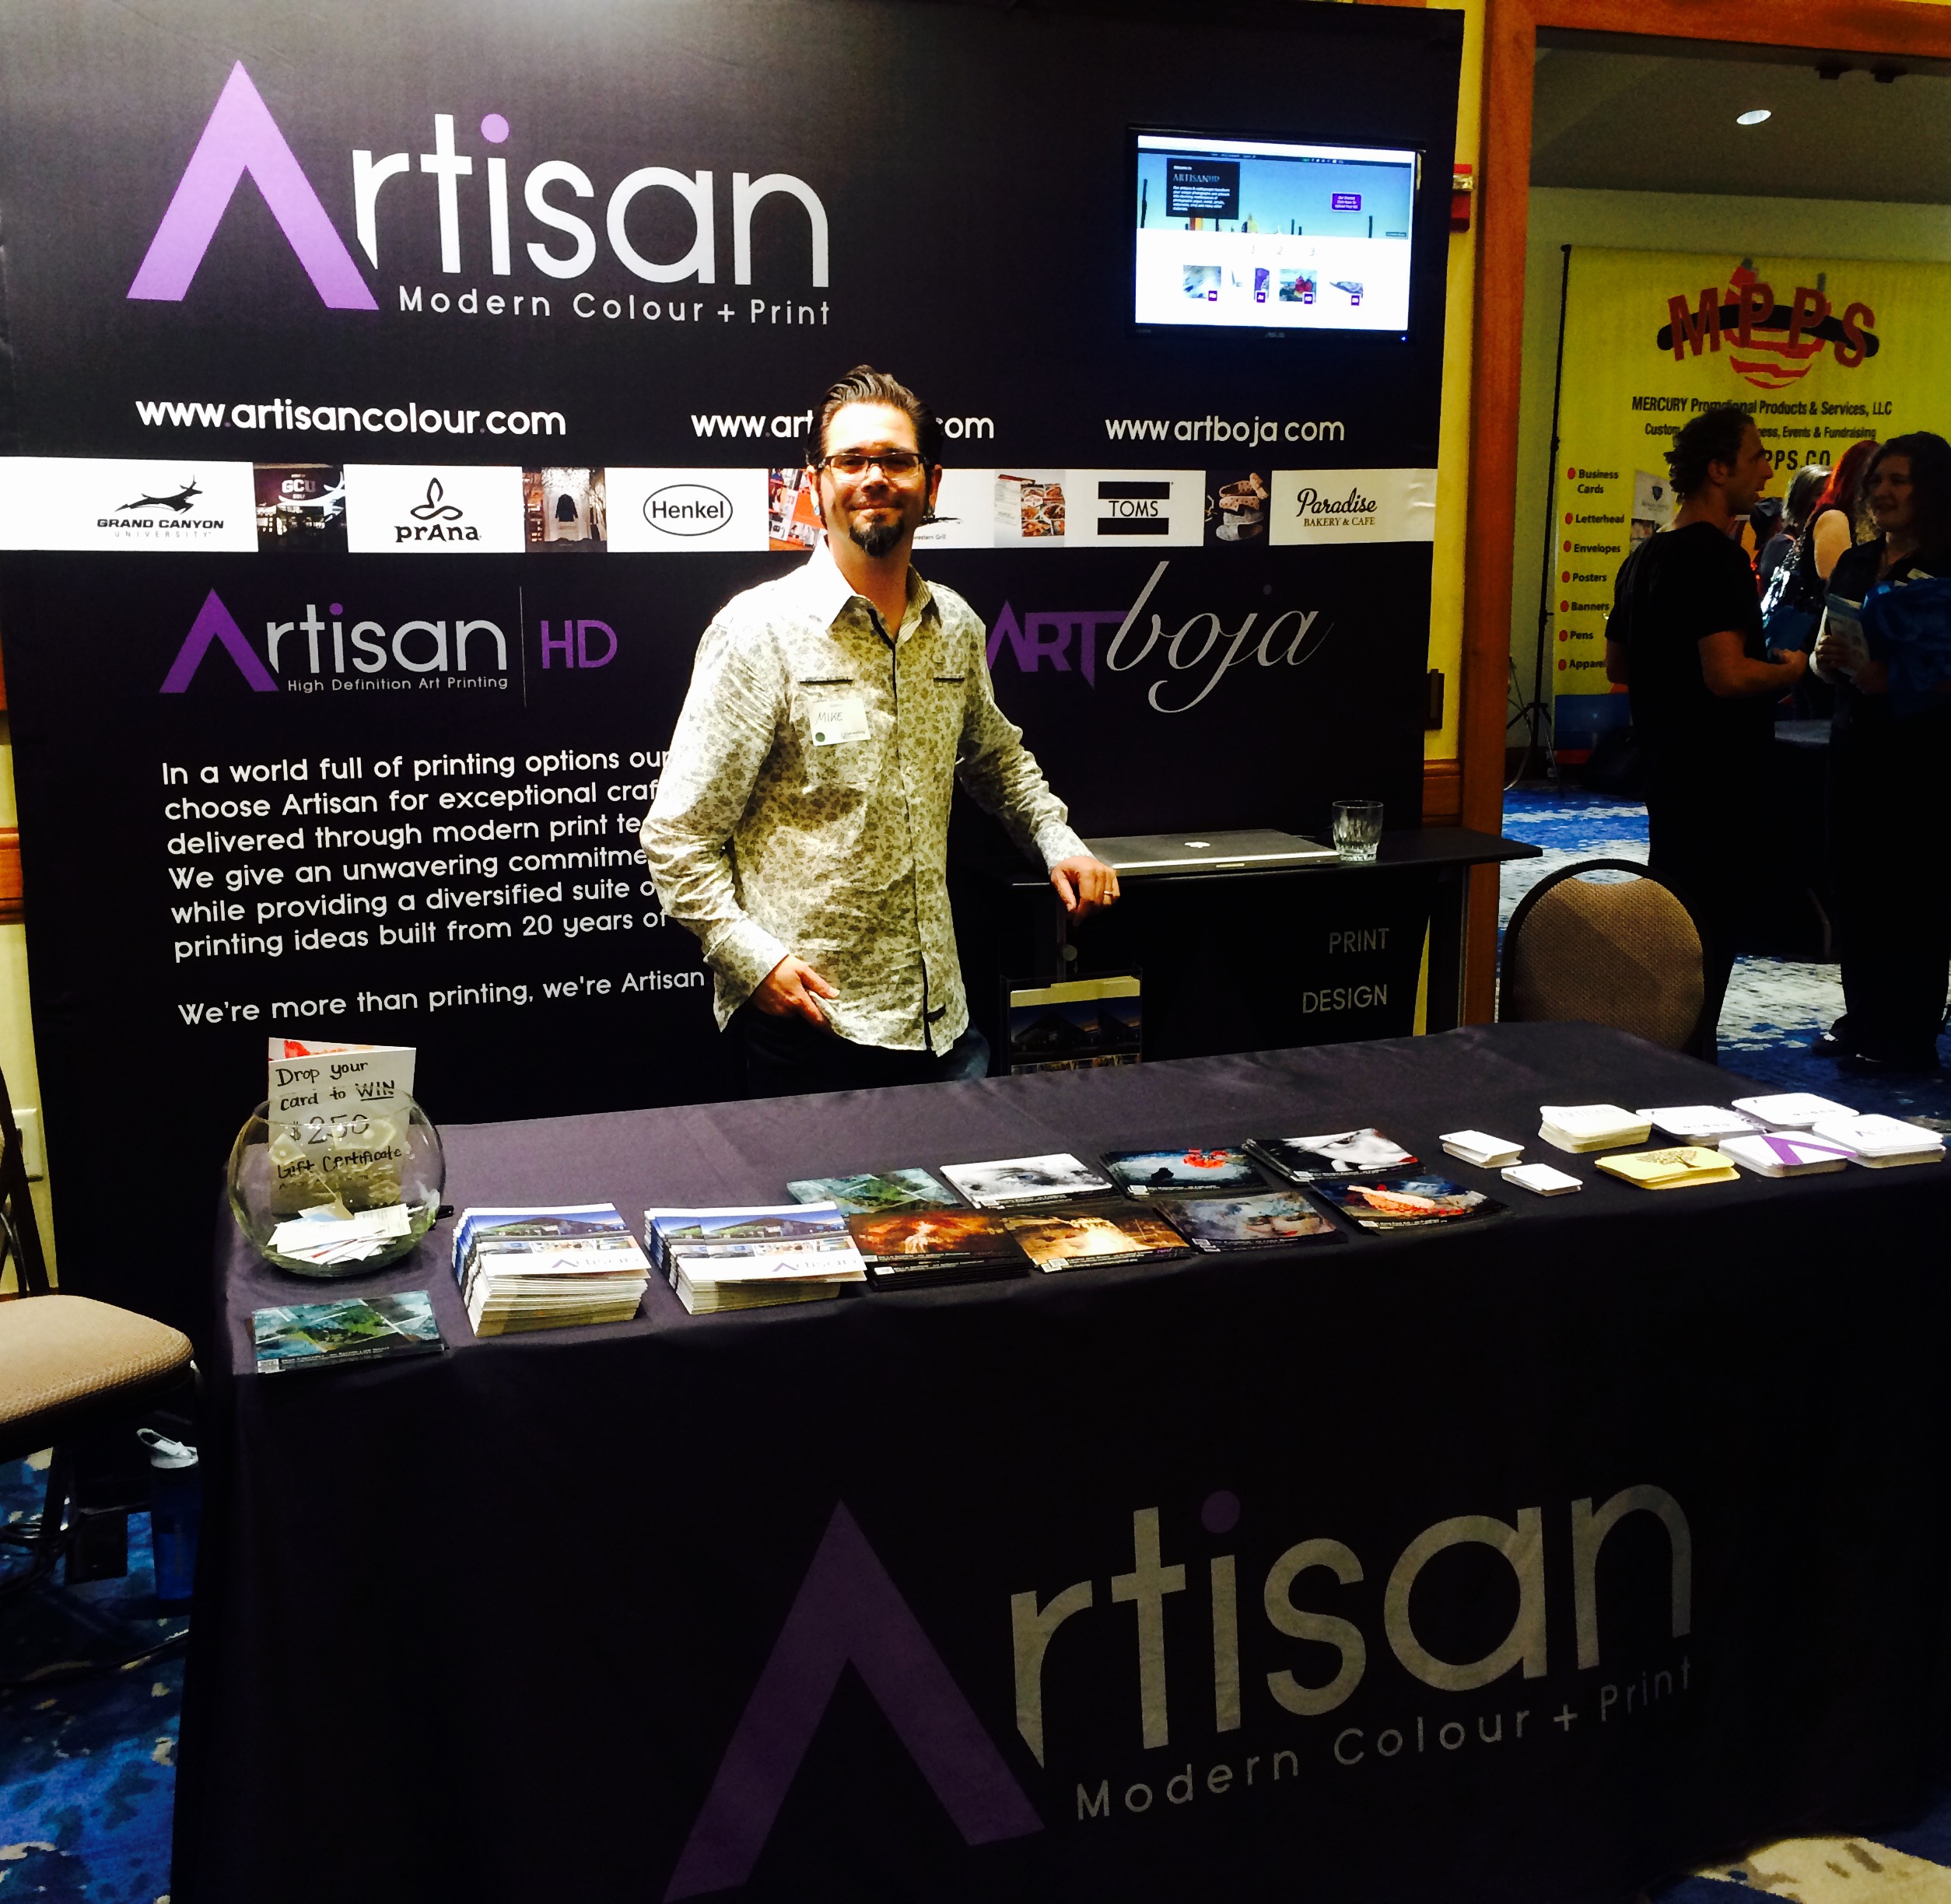 ArtisanHD showing off new booth back-drop at Phoenix Networking Signature Event